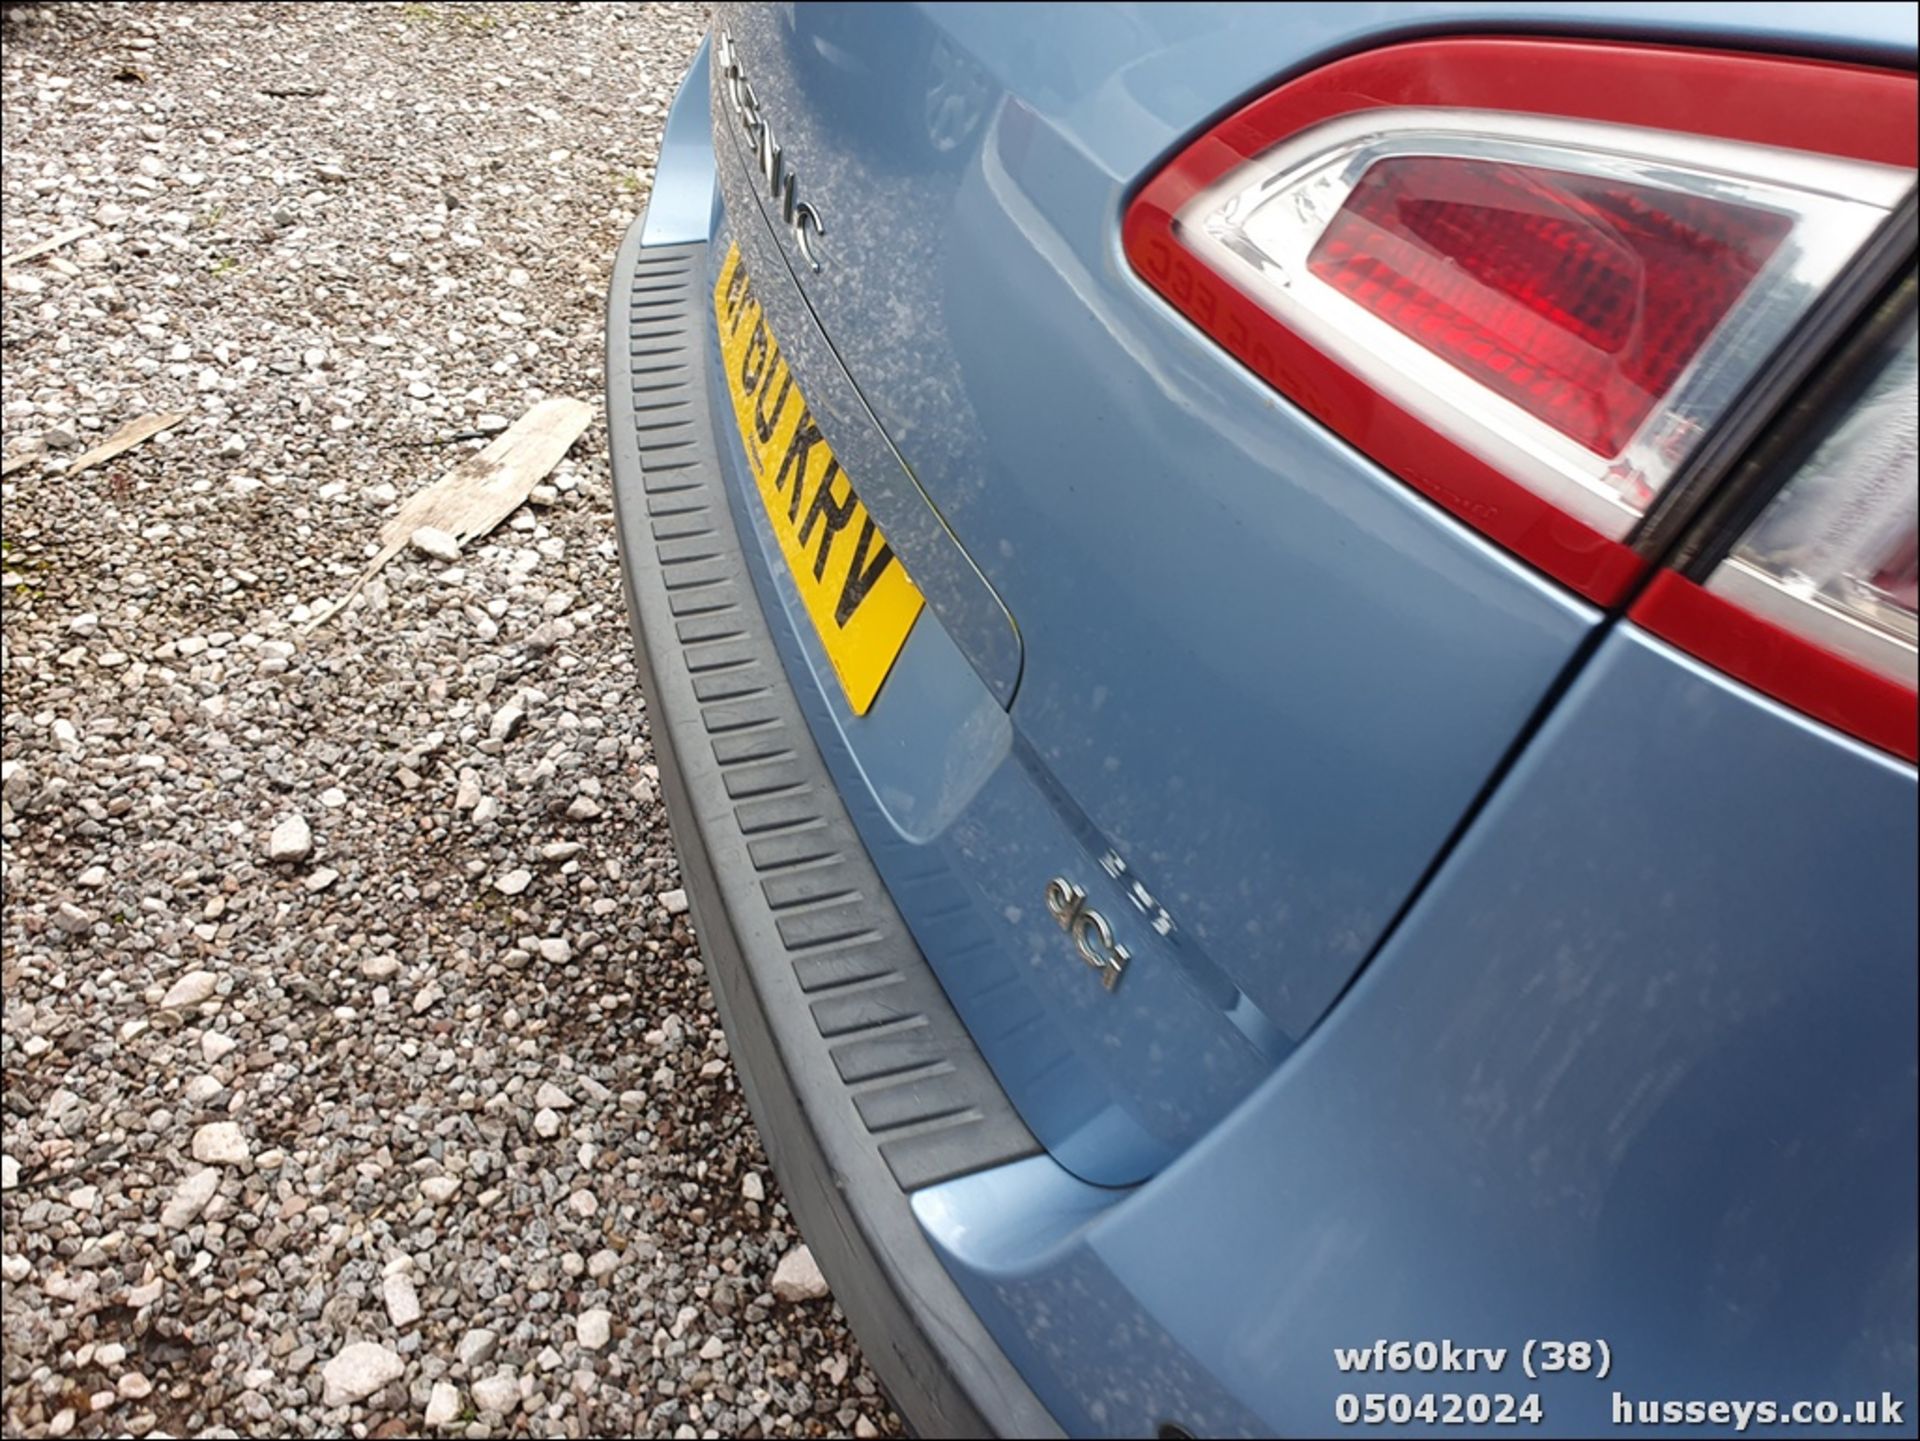 10/60 RENAULT SCENIC EXPRESSION DCI 105 - 1461cc 5dr MPV (Blue) - Image 39 of 50